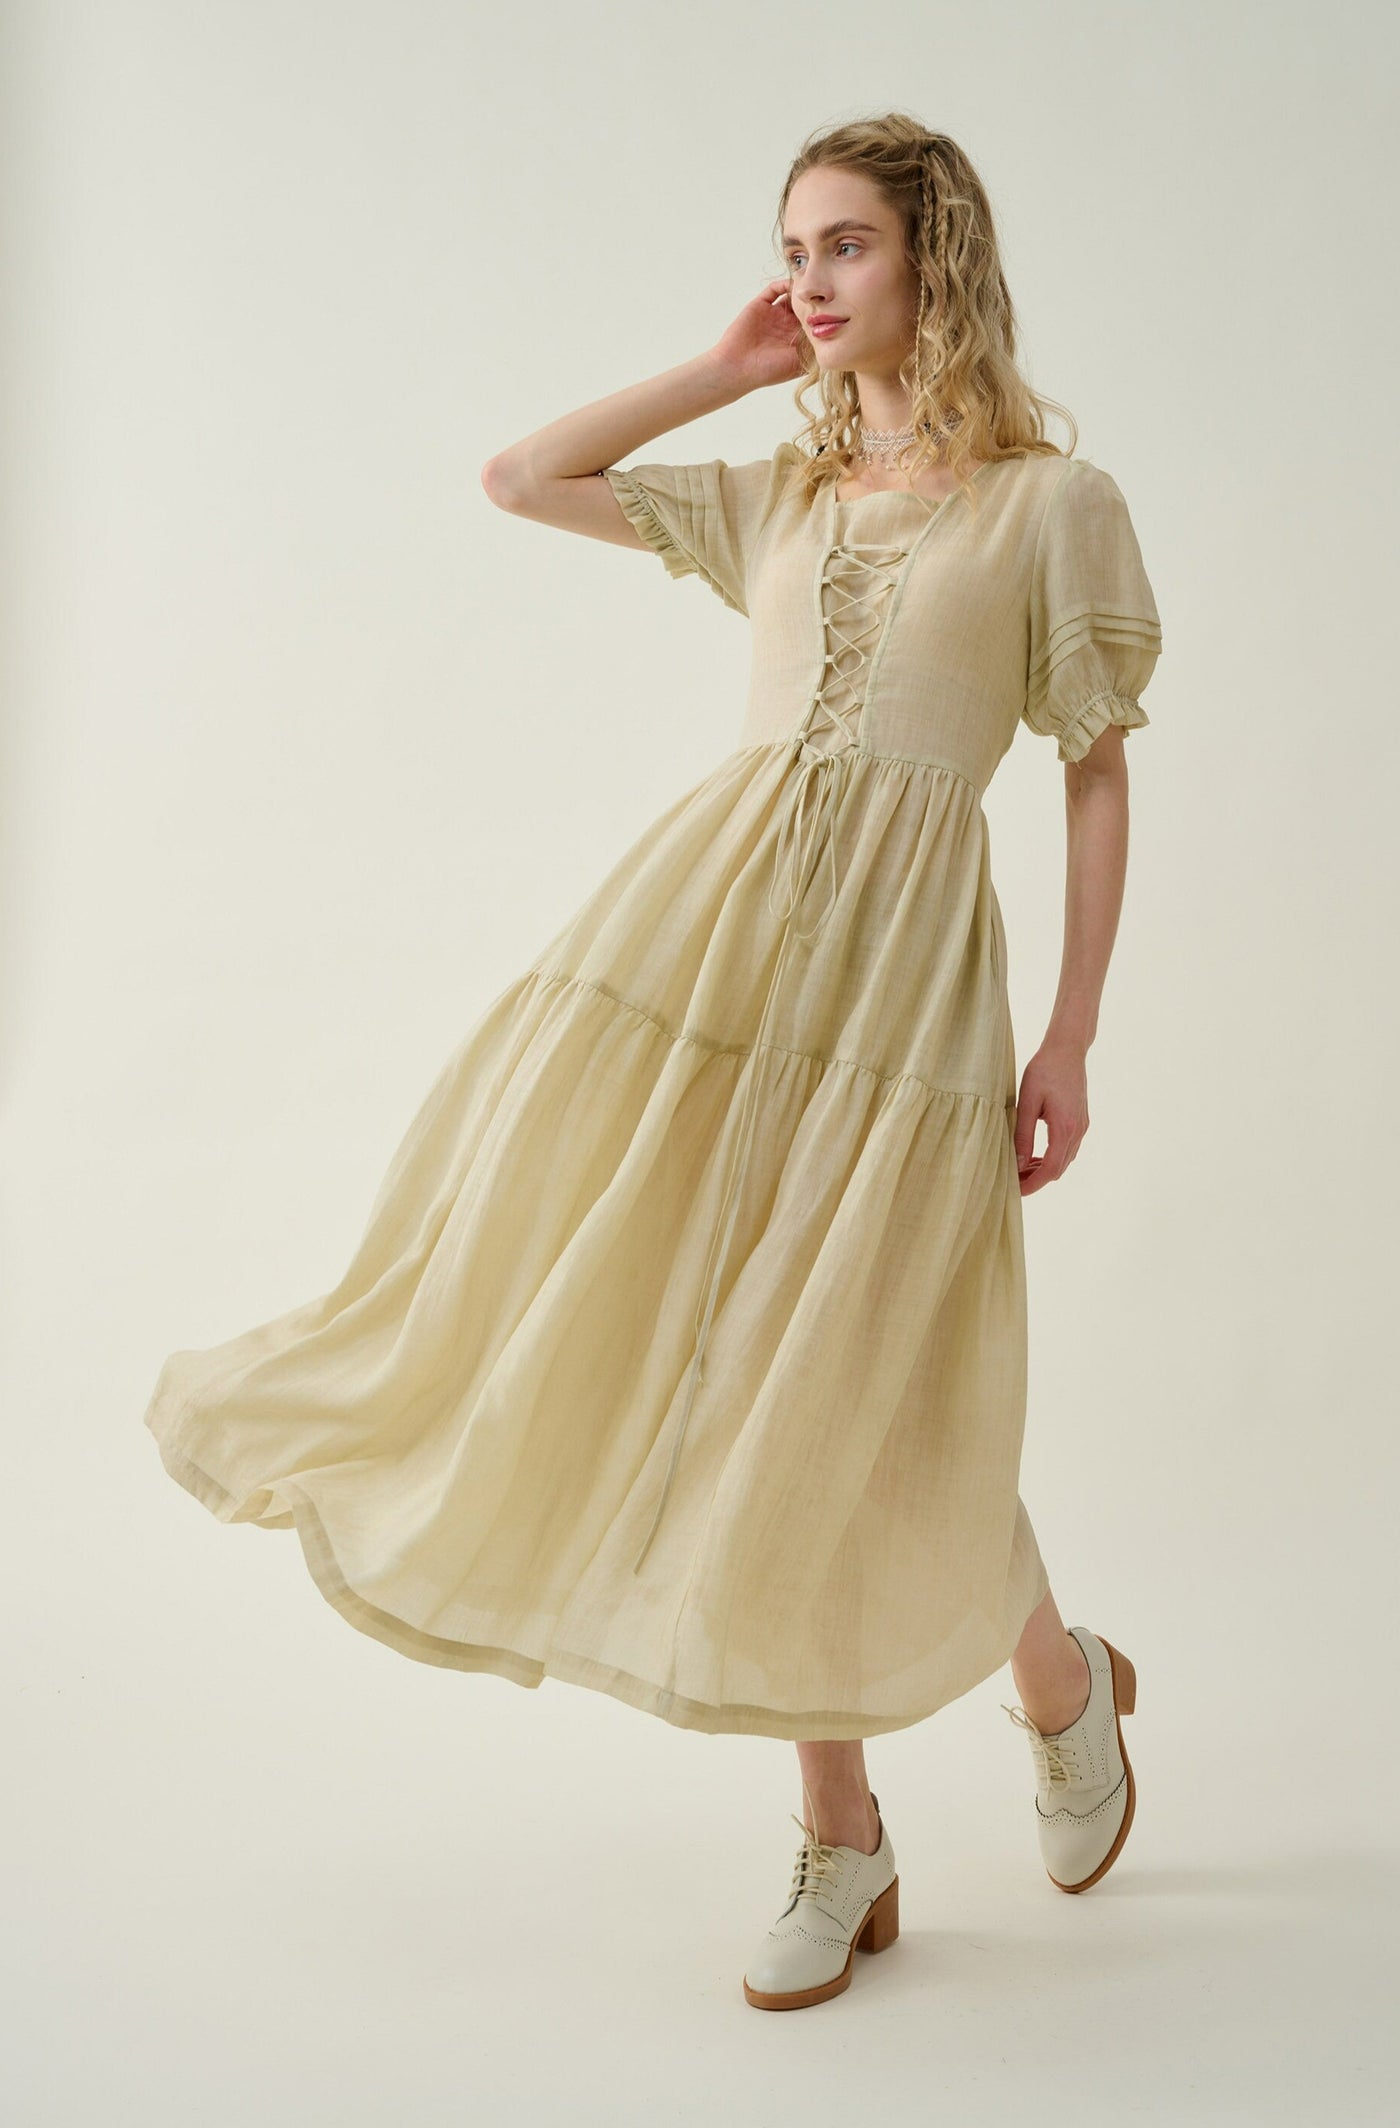 Adelia | Tiered lace-up linen dress